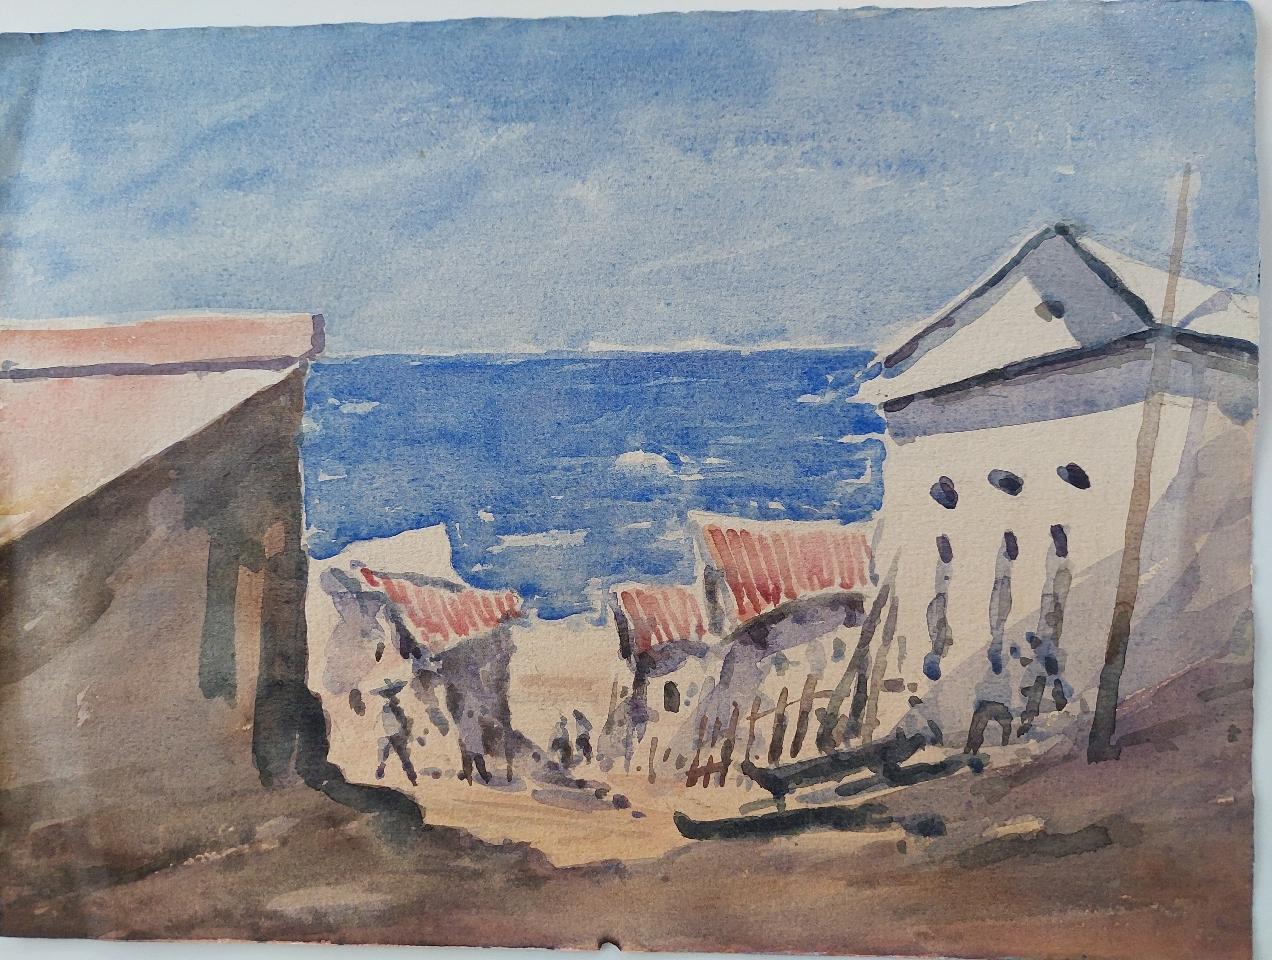 Path to the Beach
by Maurice Mazeilie (French, 1924-2021)
watercolor painting on artist paper, unframed
unsigned
stamped verso
A glorious summer scene of red roofed cottages lining a steep path down to the beach, with figures making their way